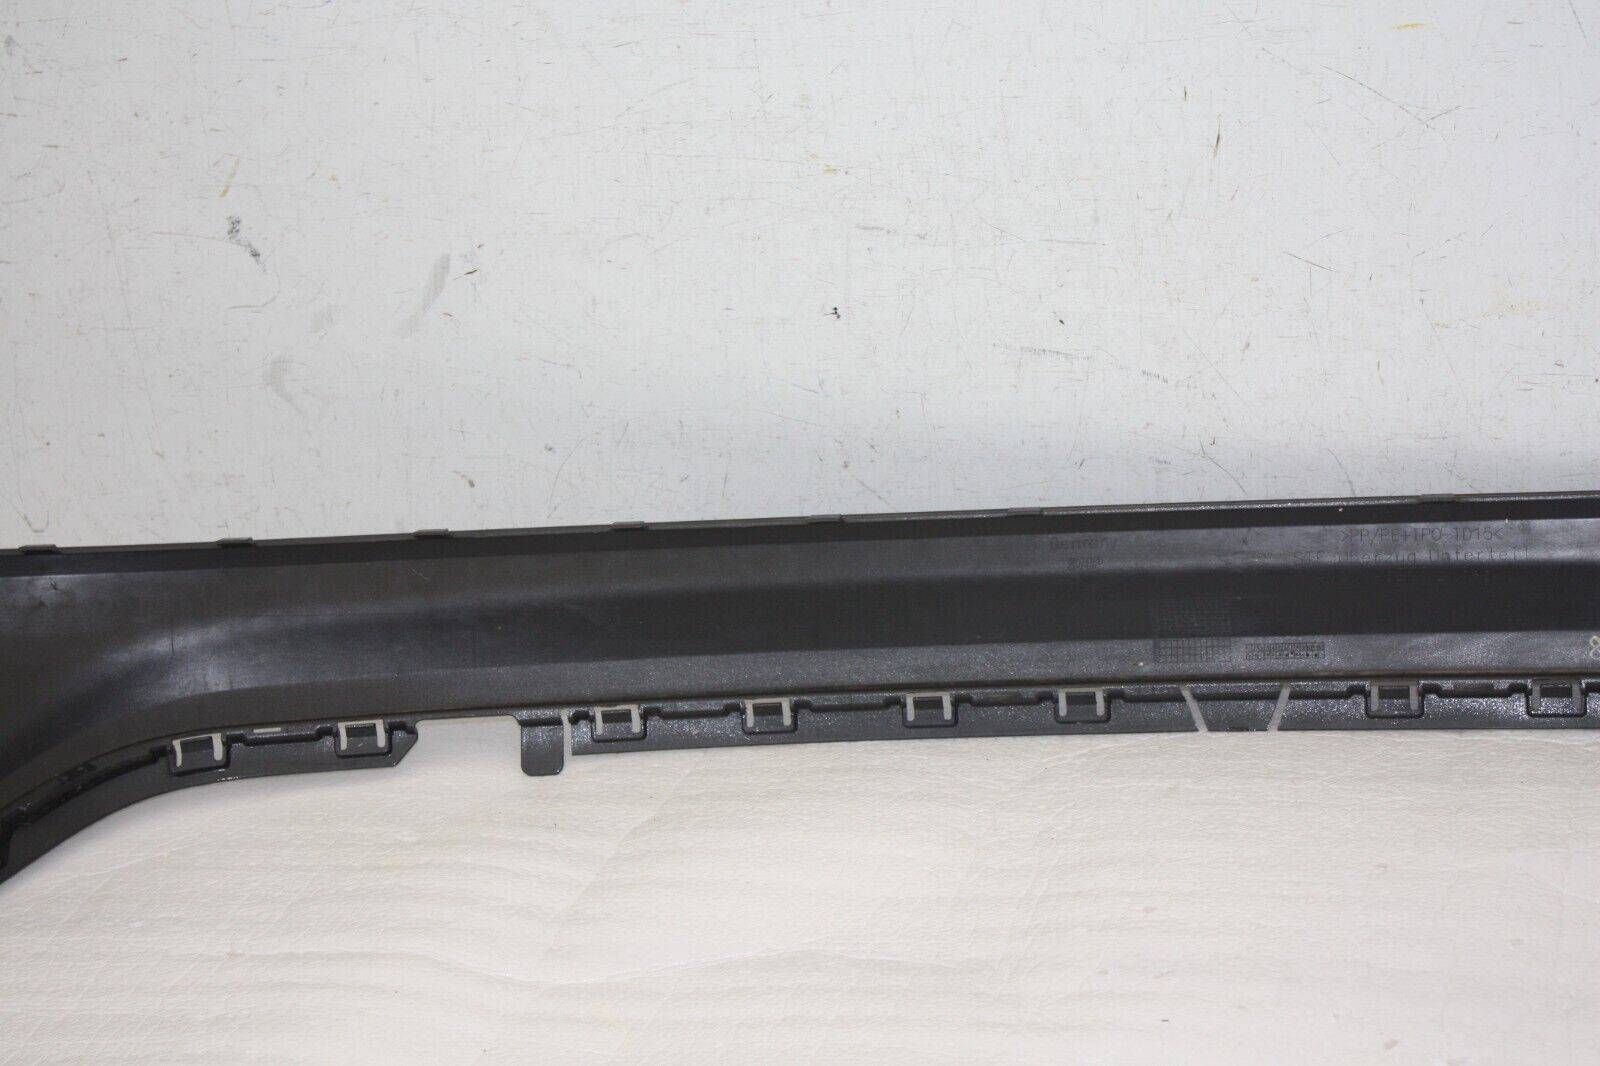 Audi-Q2-Rear-Bumper-Lower-Section-2016-TO-2021-81A807323-Genuine-176376526279-12